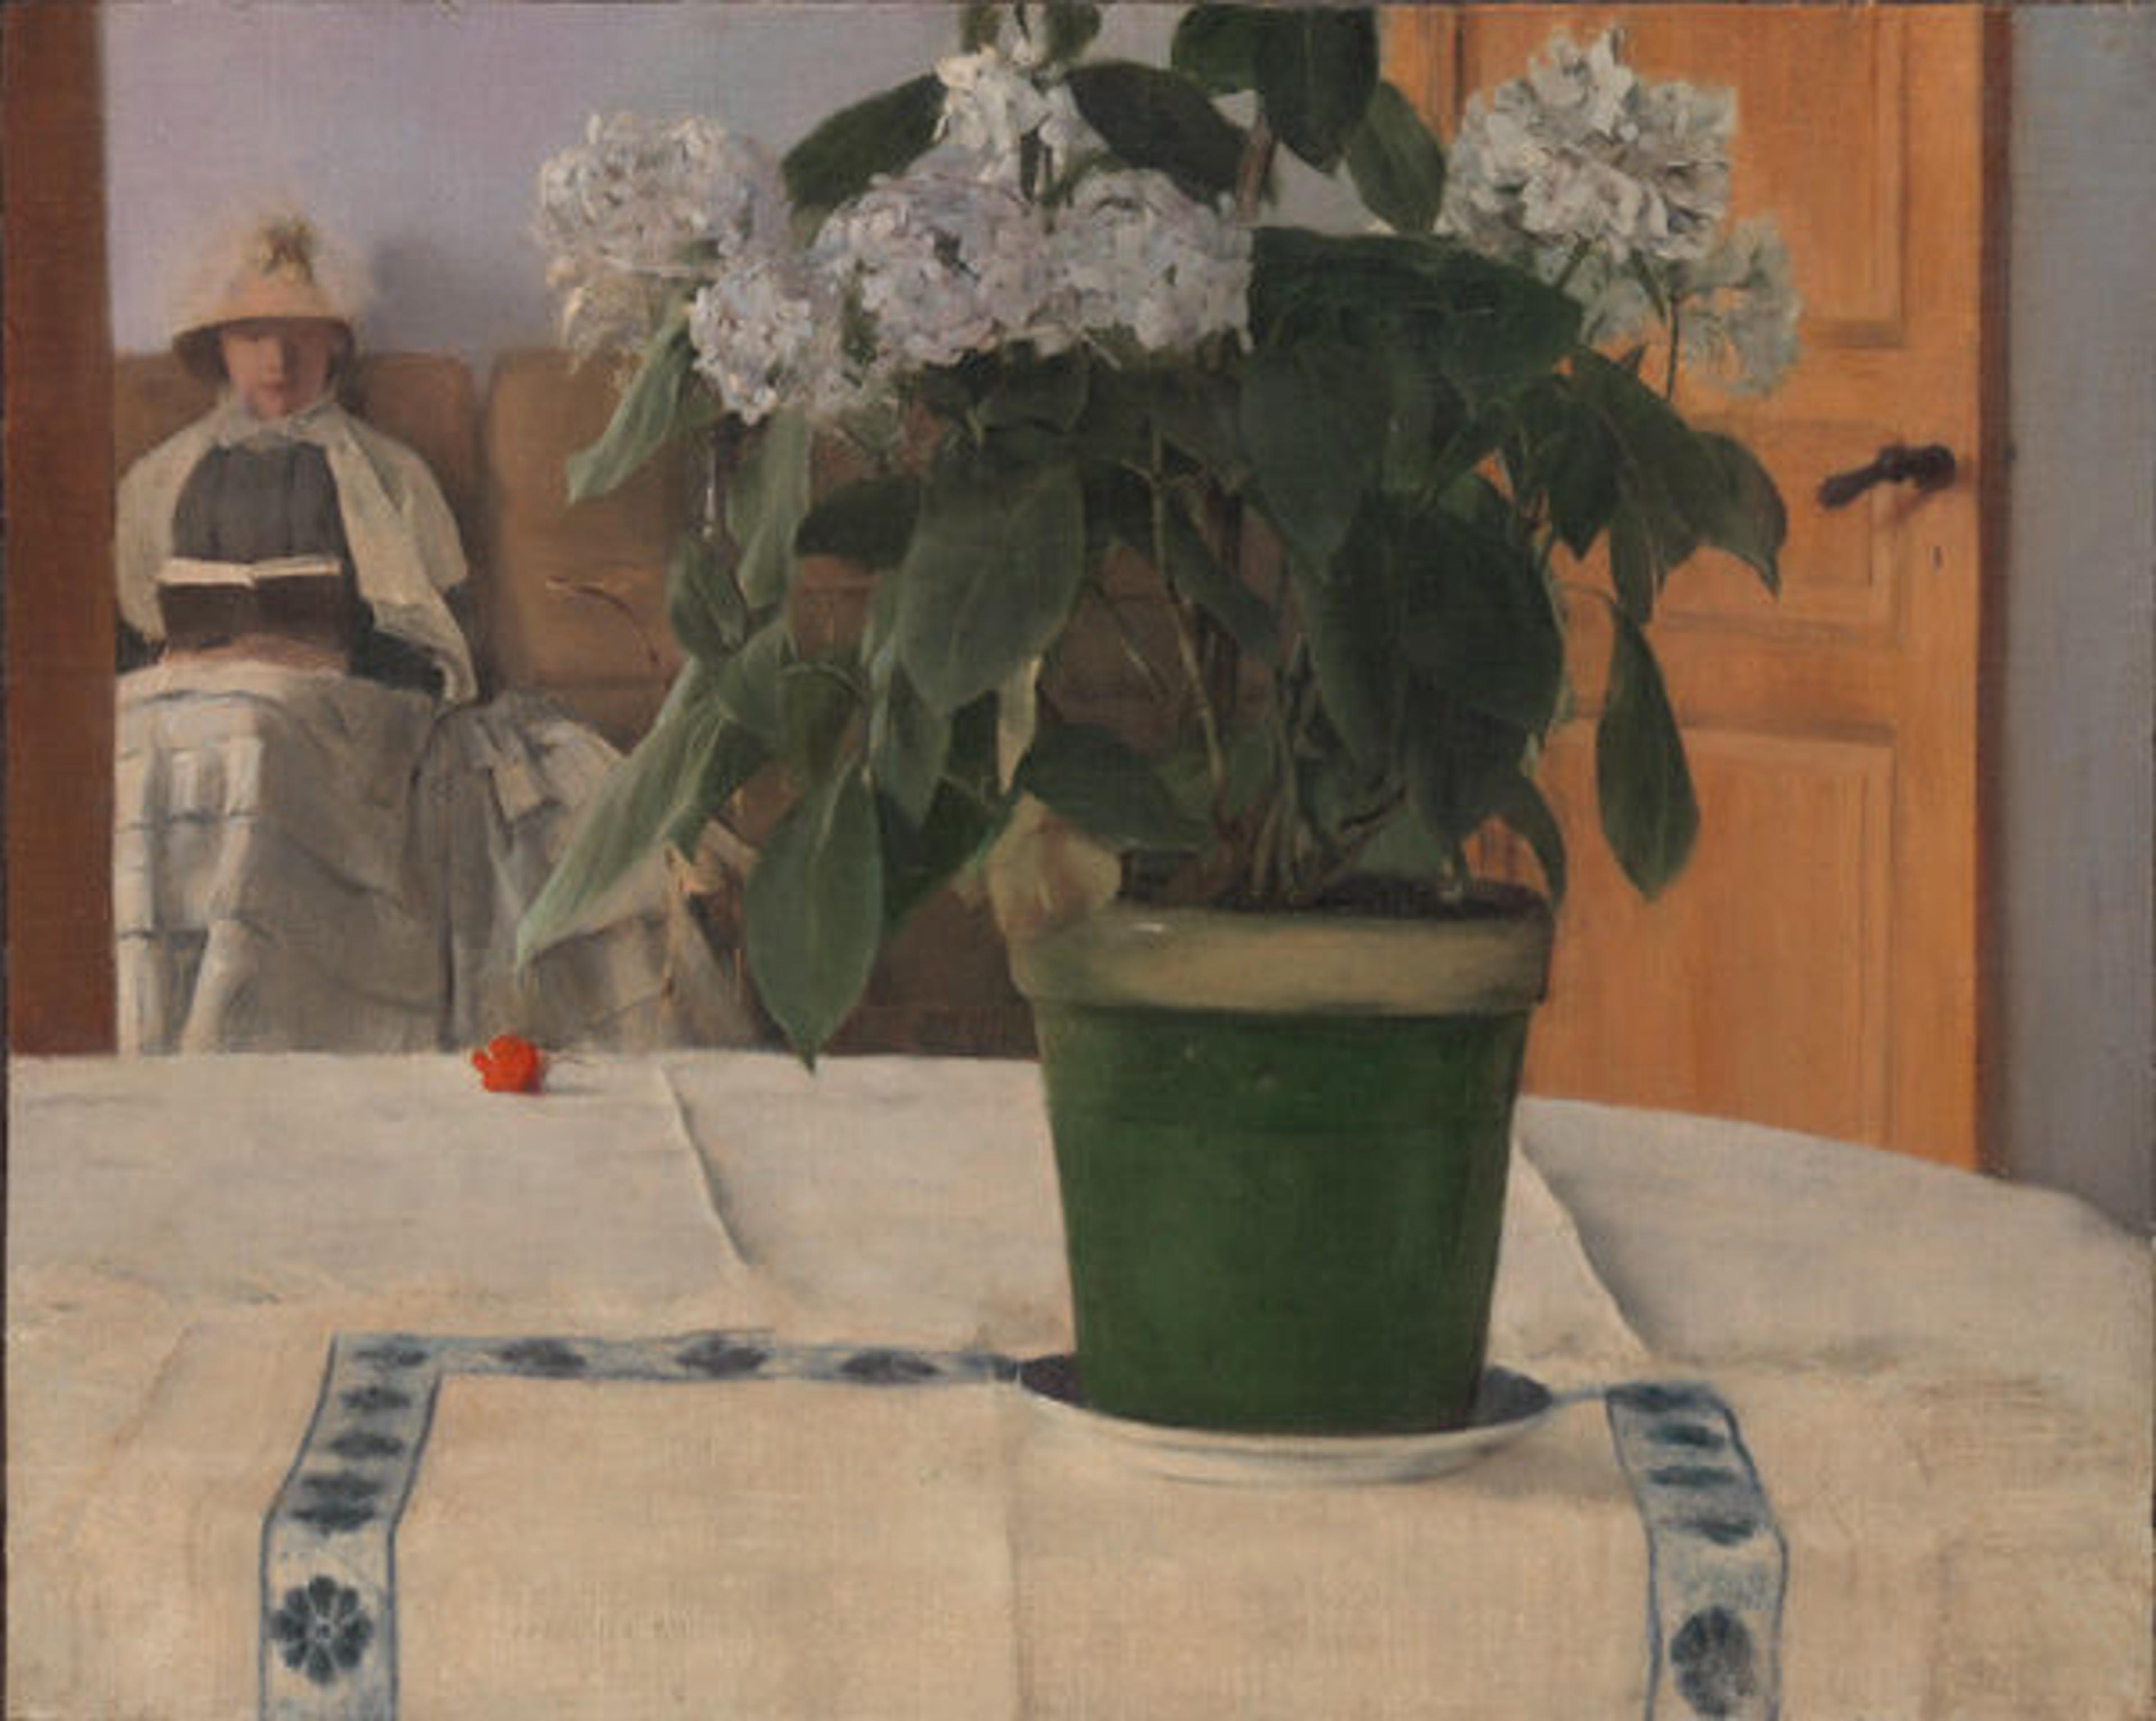 Fernand Khnopff (Belgian, 1858–1921). Hortensia, 1884. Oil on canvas; 18 13/16 x 23 1/2 in. (47.8 x 59.7 cm). The Metropolitan Museum of Art, New York, Purchase, Bequest of Julia W. Emmons, by exchange, and Catharine Lorillard Wolfe Collection, Wolfe Fund, and Promised Gift of Charles Hack and the Hearn Family Trust, 2015 (2015.263)